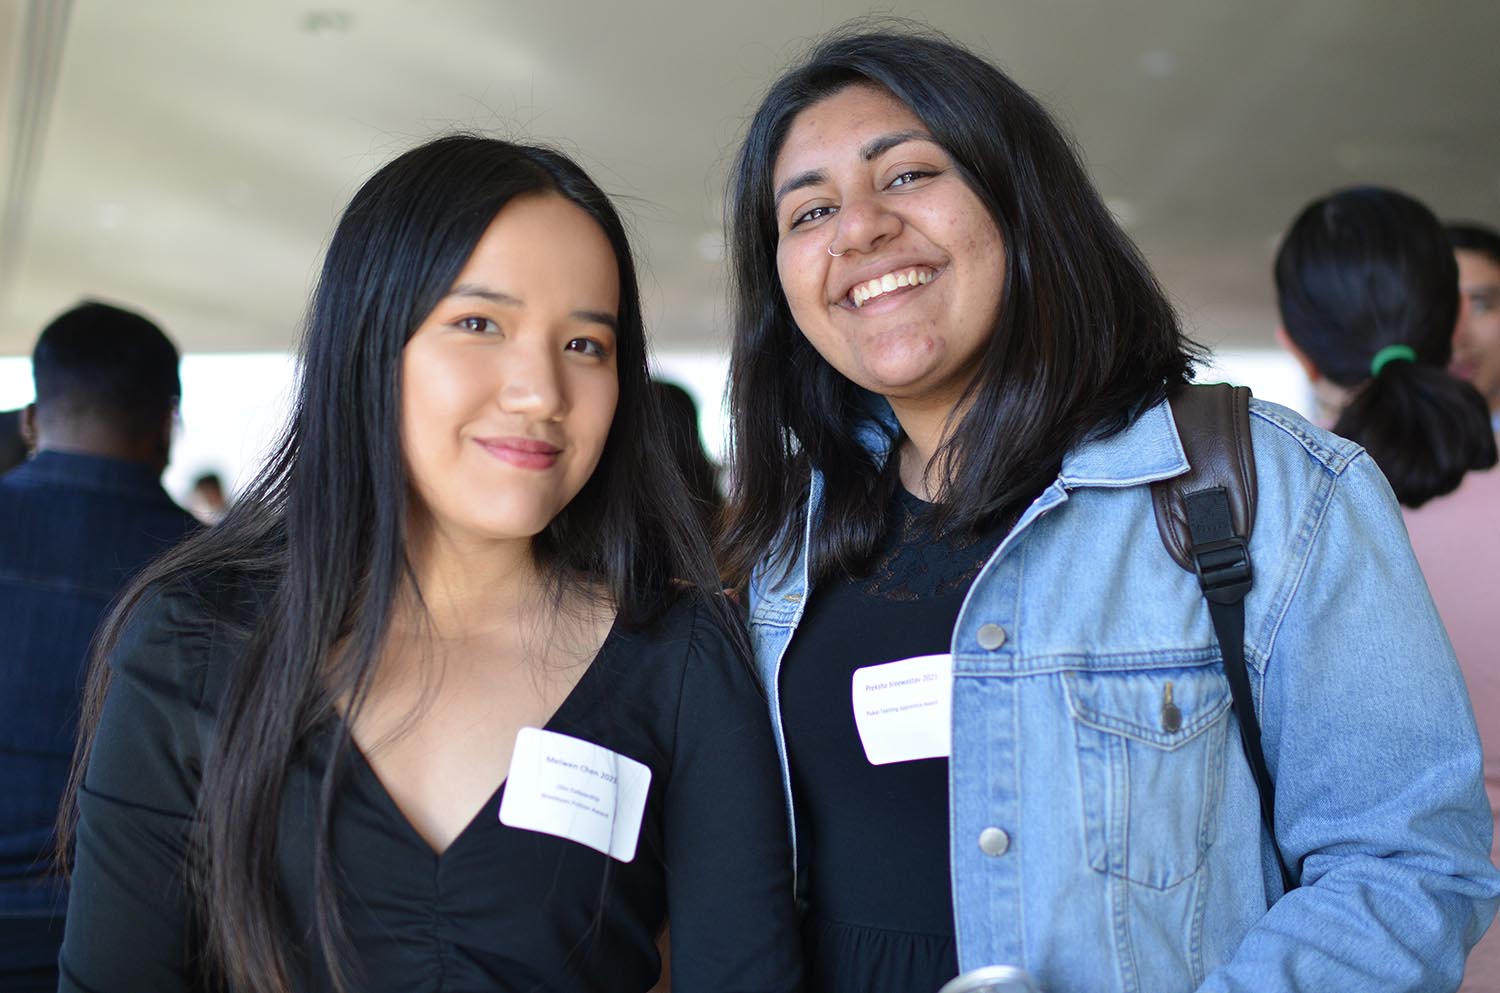 Meiwen Chen '21 won a Wesleyan Fiction Award and an Olin Fellowship. Preksha Sreewastav '21 received a Plukas Teaching Apprentice Award for excellent service to the Economics Department as a teaching apprentice. 